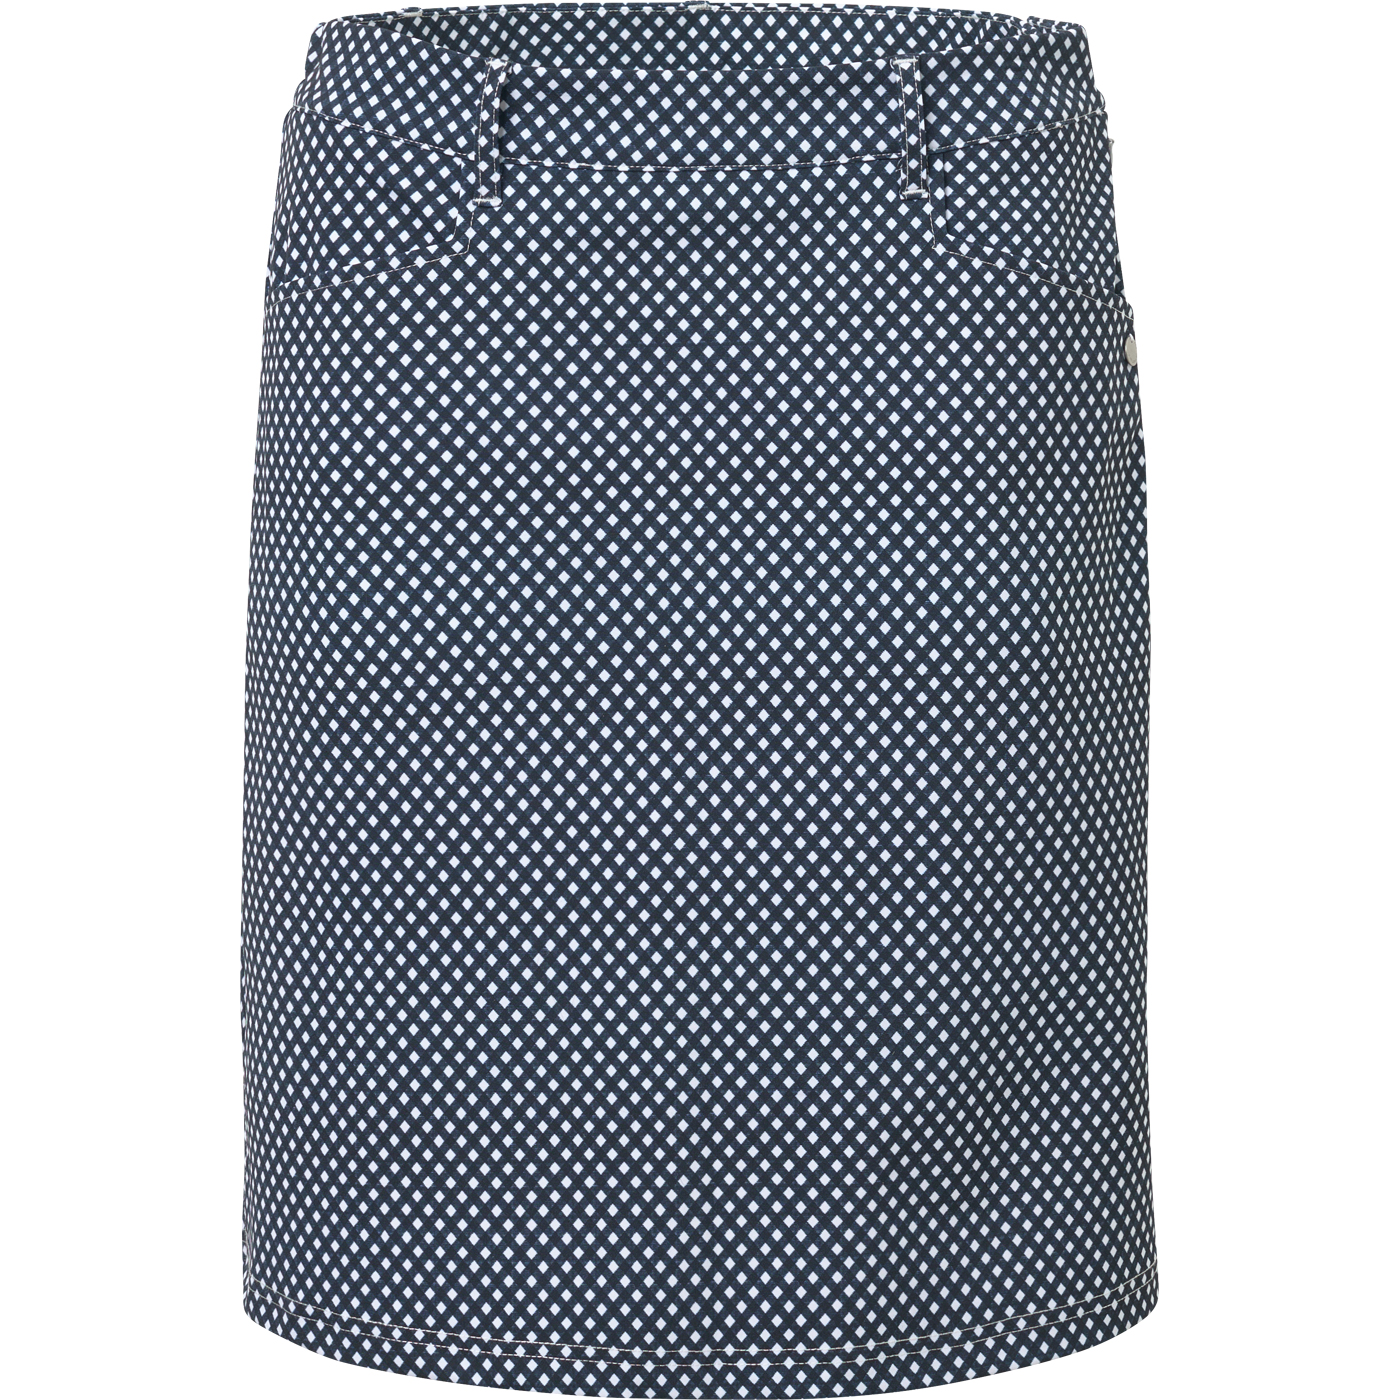 Lds Merion skort 50cm - navy check in the group WOMEN / All clothing at Abacus Sportswear (2984394)